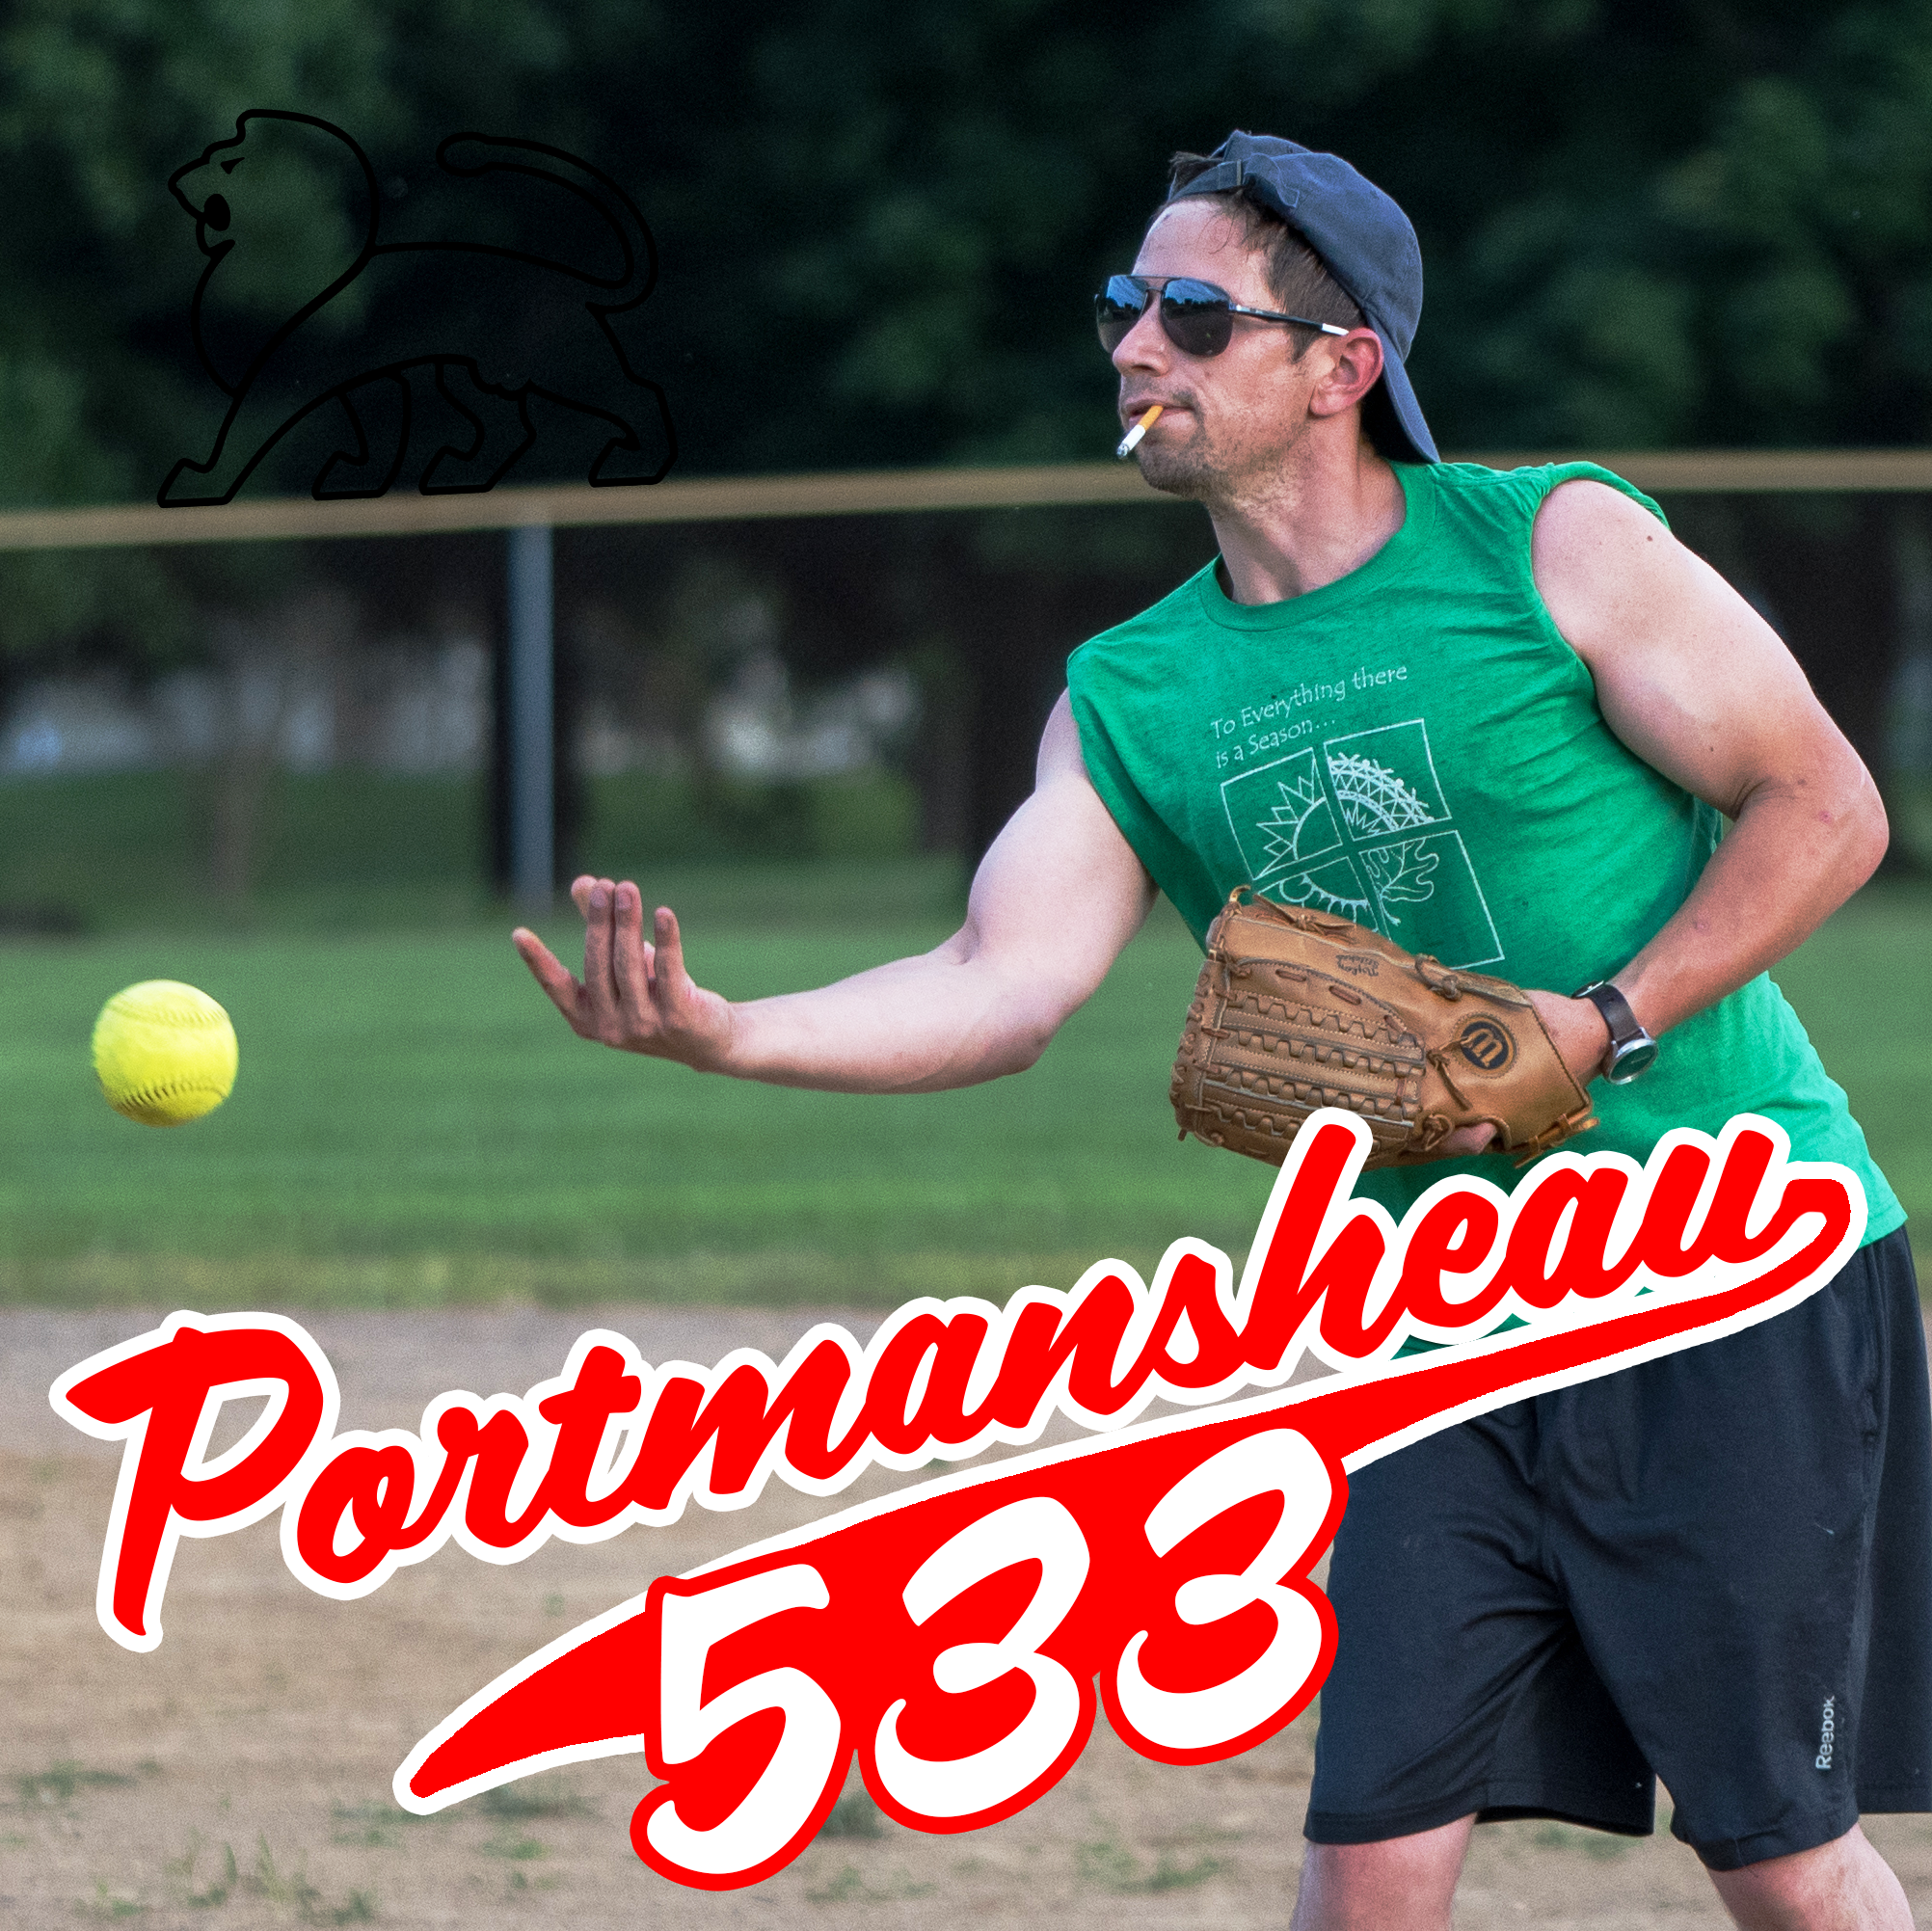 533: Luckiest Moments In Sports